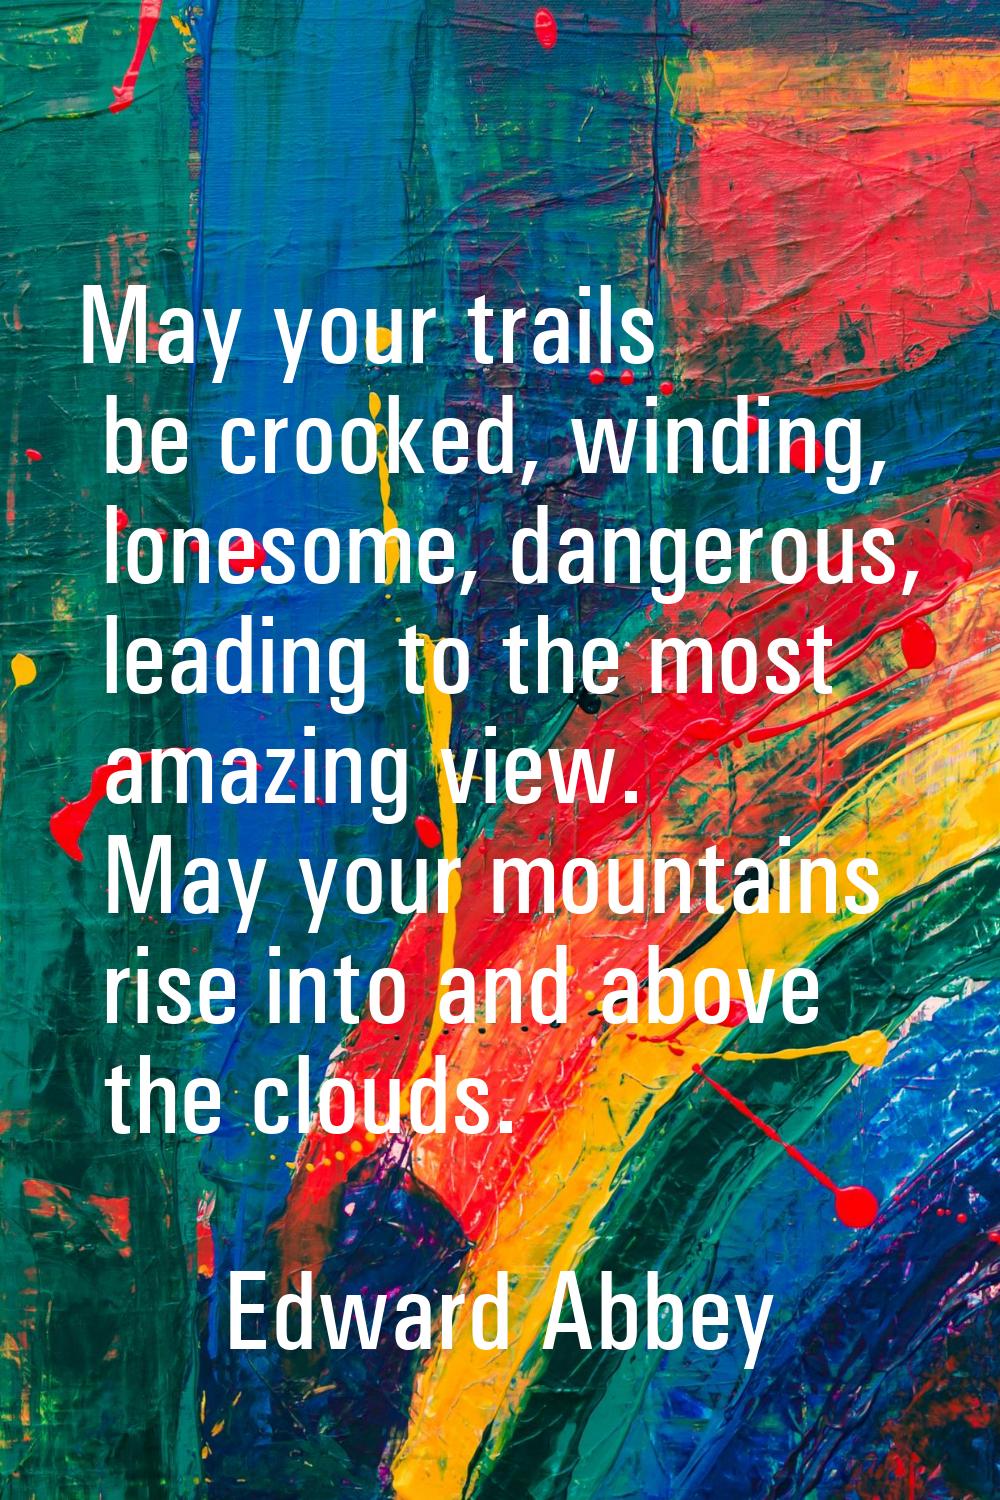 May your trails be crooked, winding, lonesome, dangerous, leading to the most amazing view. May you